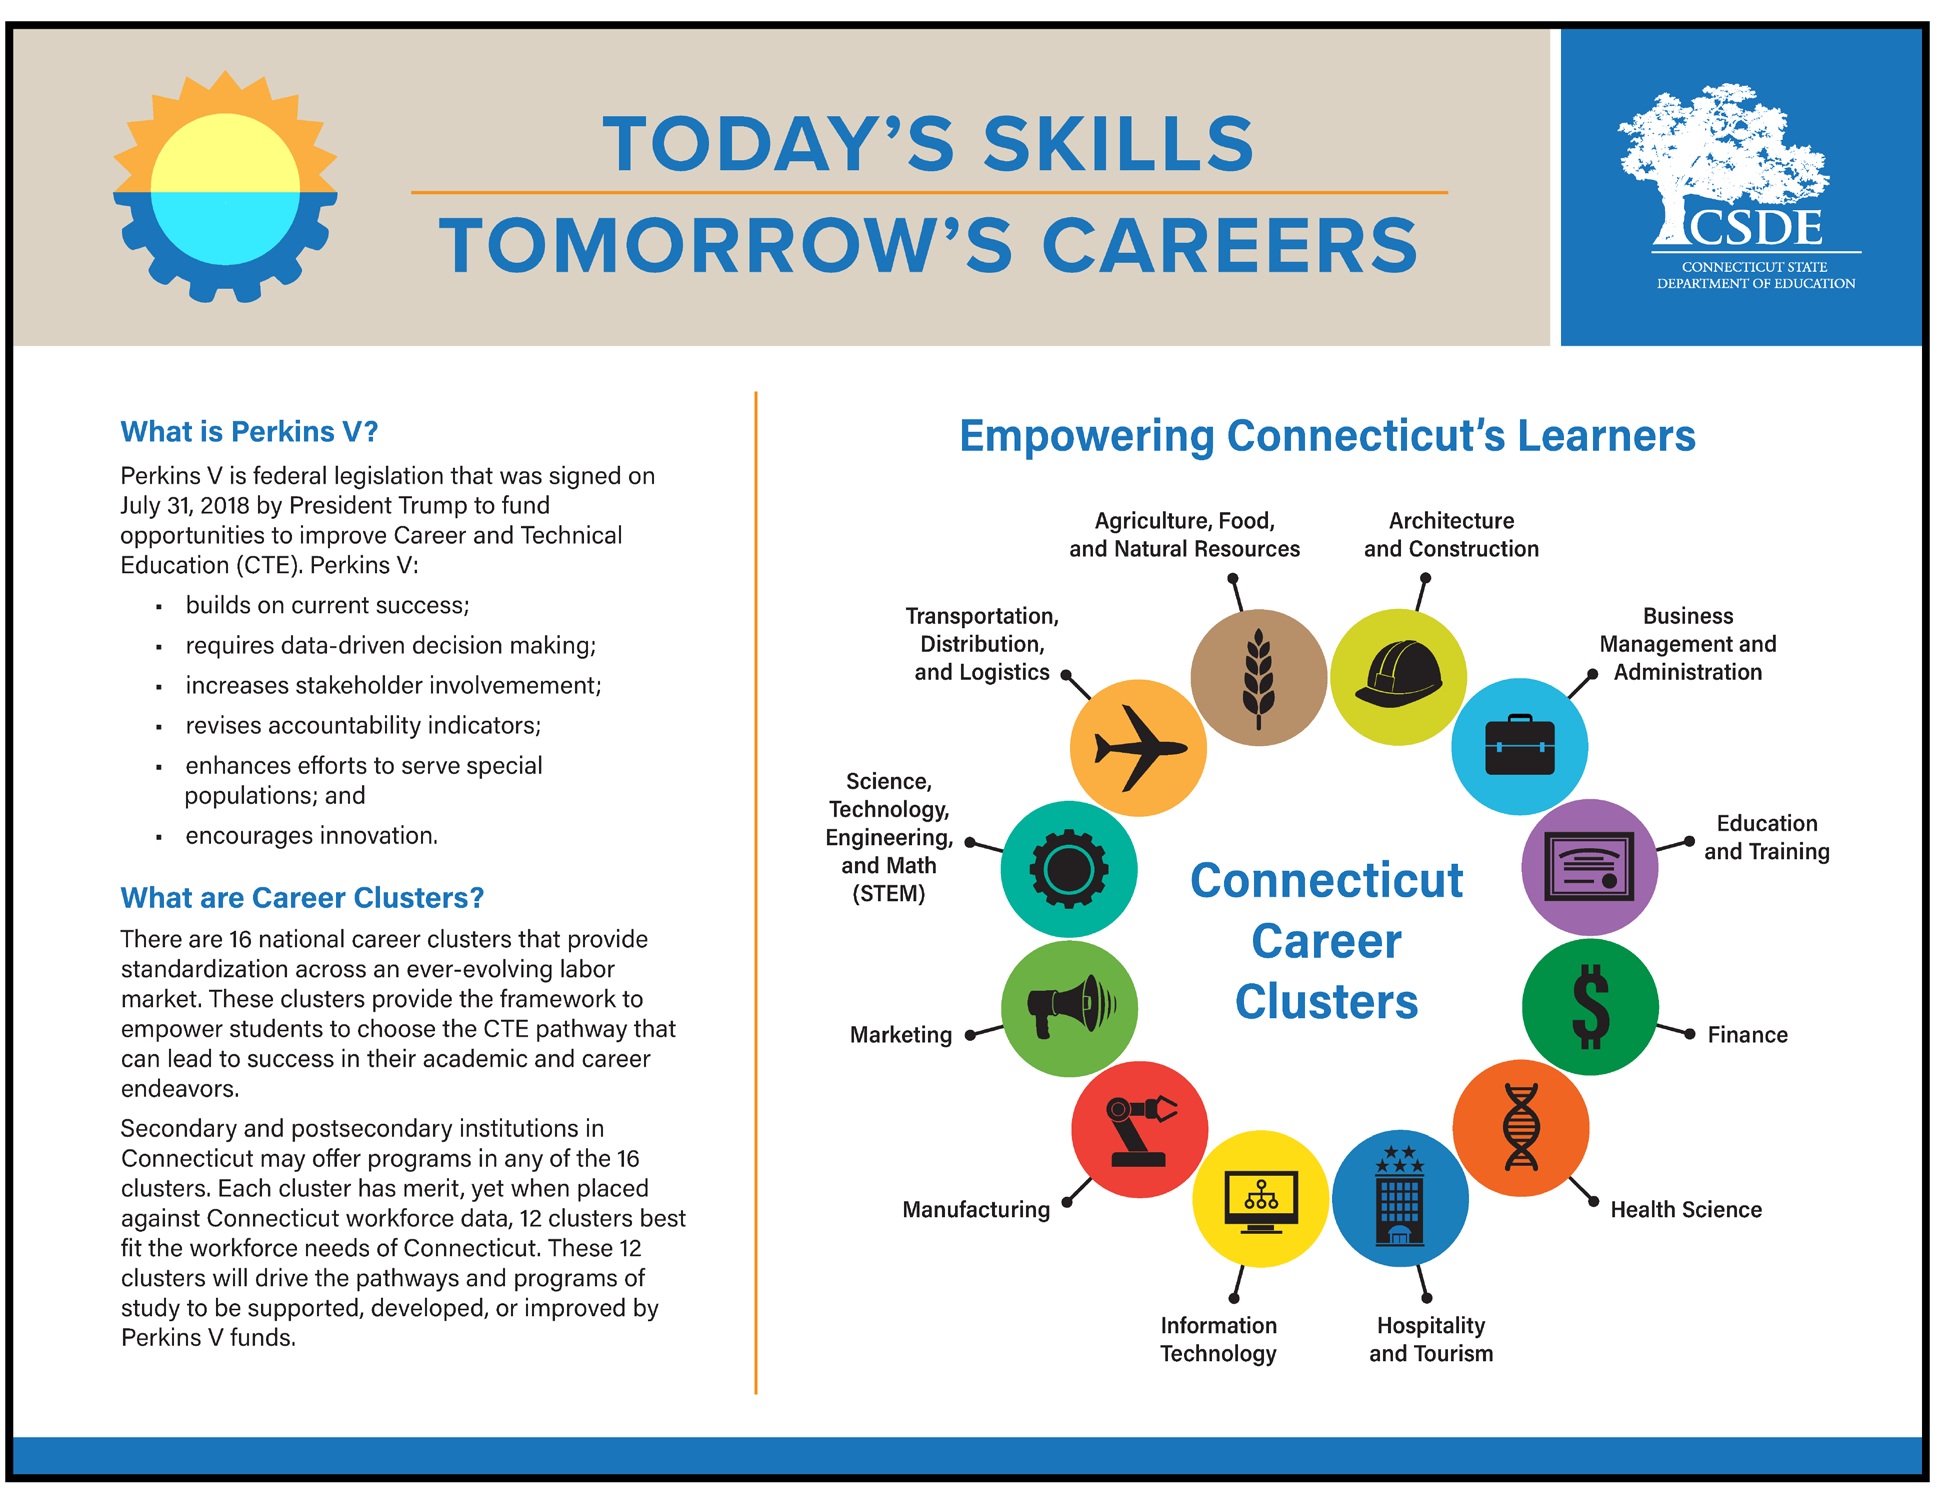 Infographic of Connecticut Career Clusters that explains what is Perkins V and what are the 16 Connecticut Career Clusters